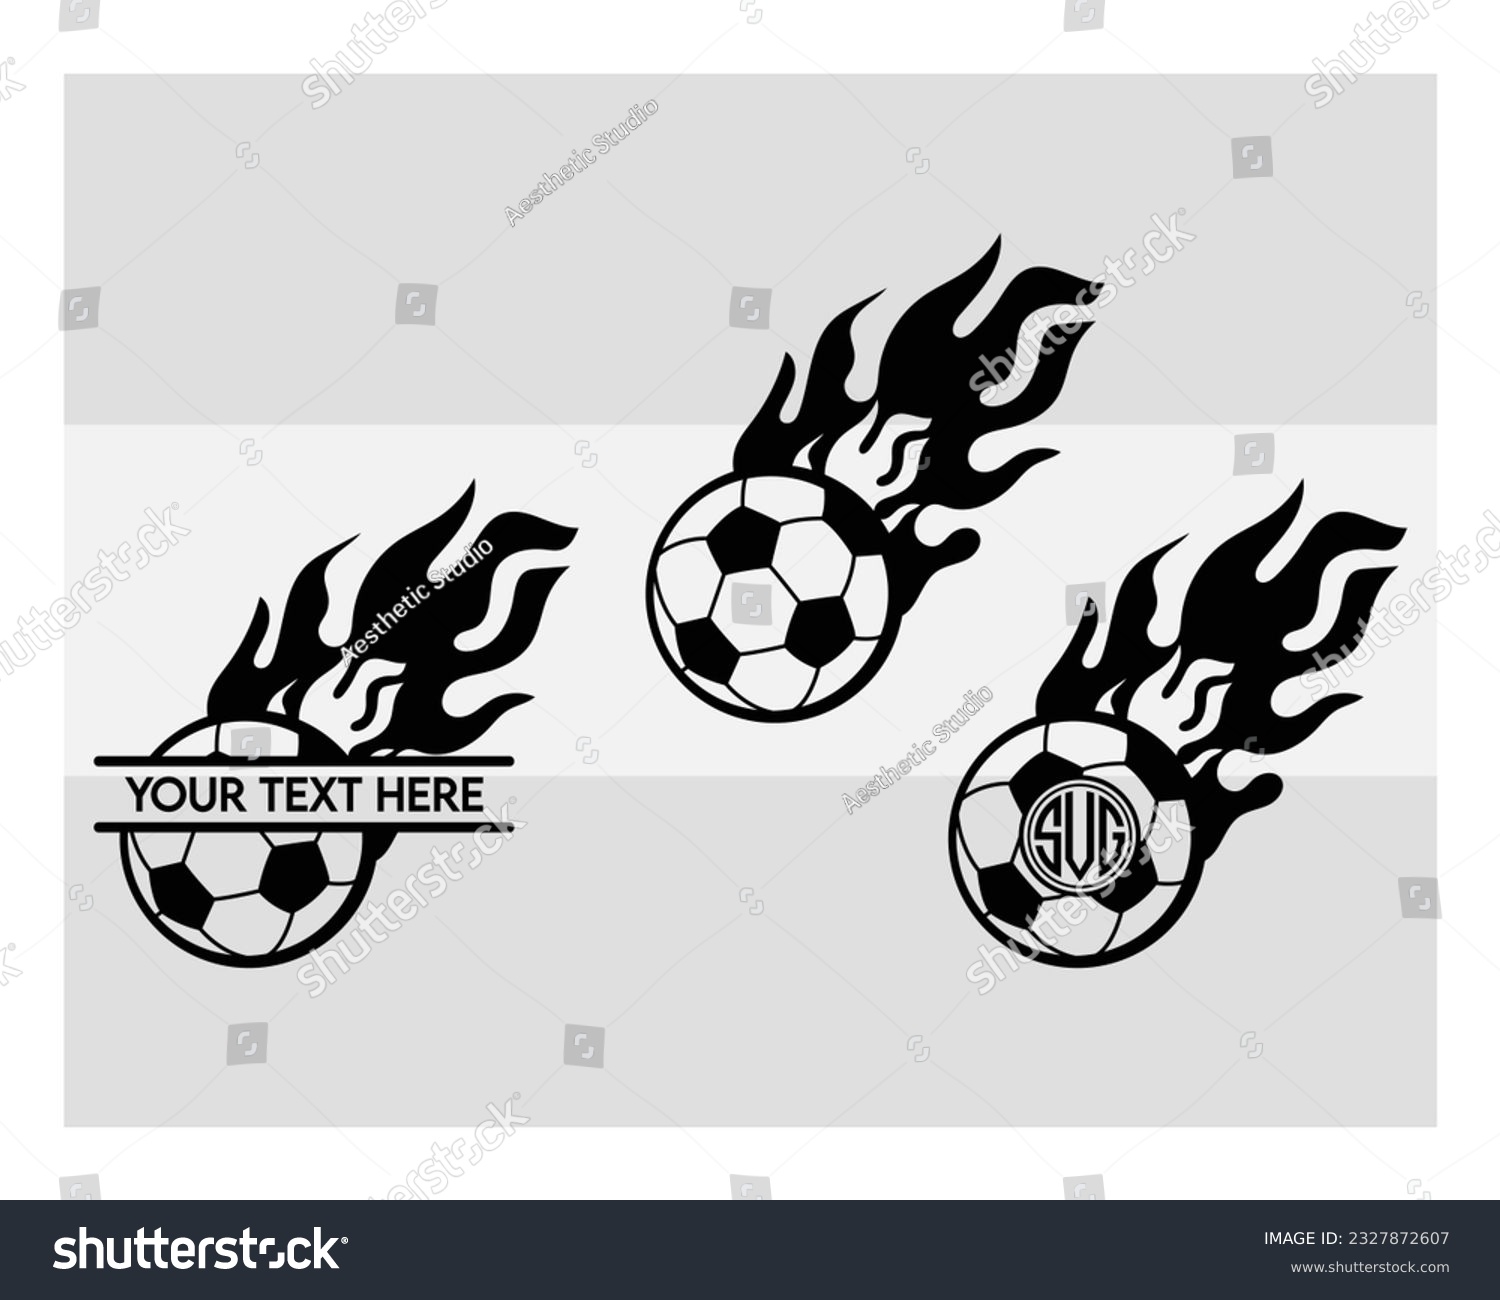 SVG of Soccer Ball, SVG Bundle, Soccer, Ball Svg, Circut Cut Files Silhouette, Sports Game, Football Svg, Soccer Fire Svg, Silhouette, Soccer Clipart, Vector, Outline svg